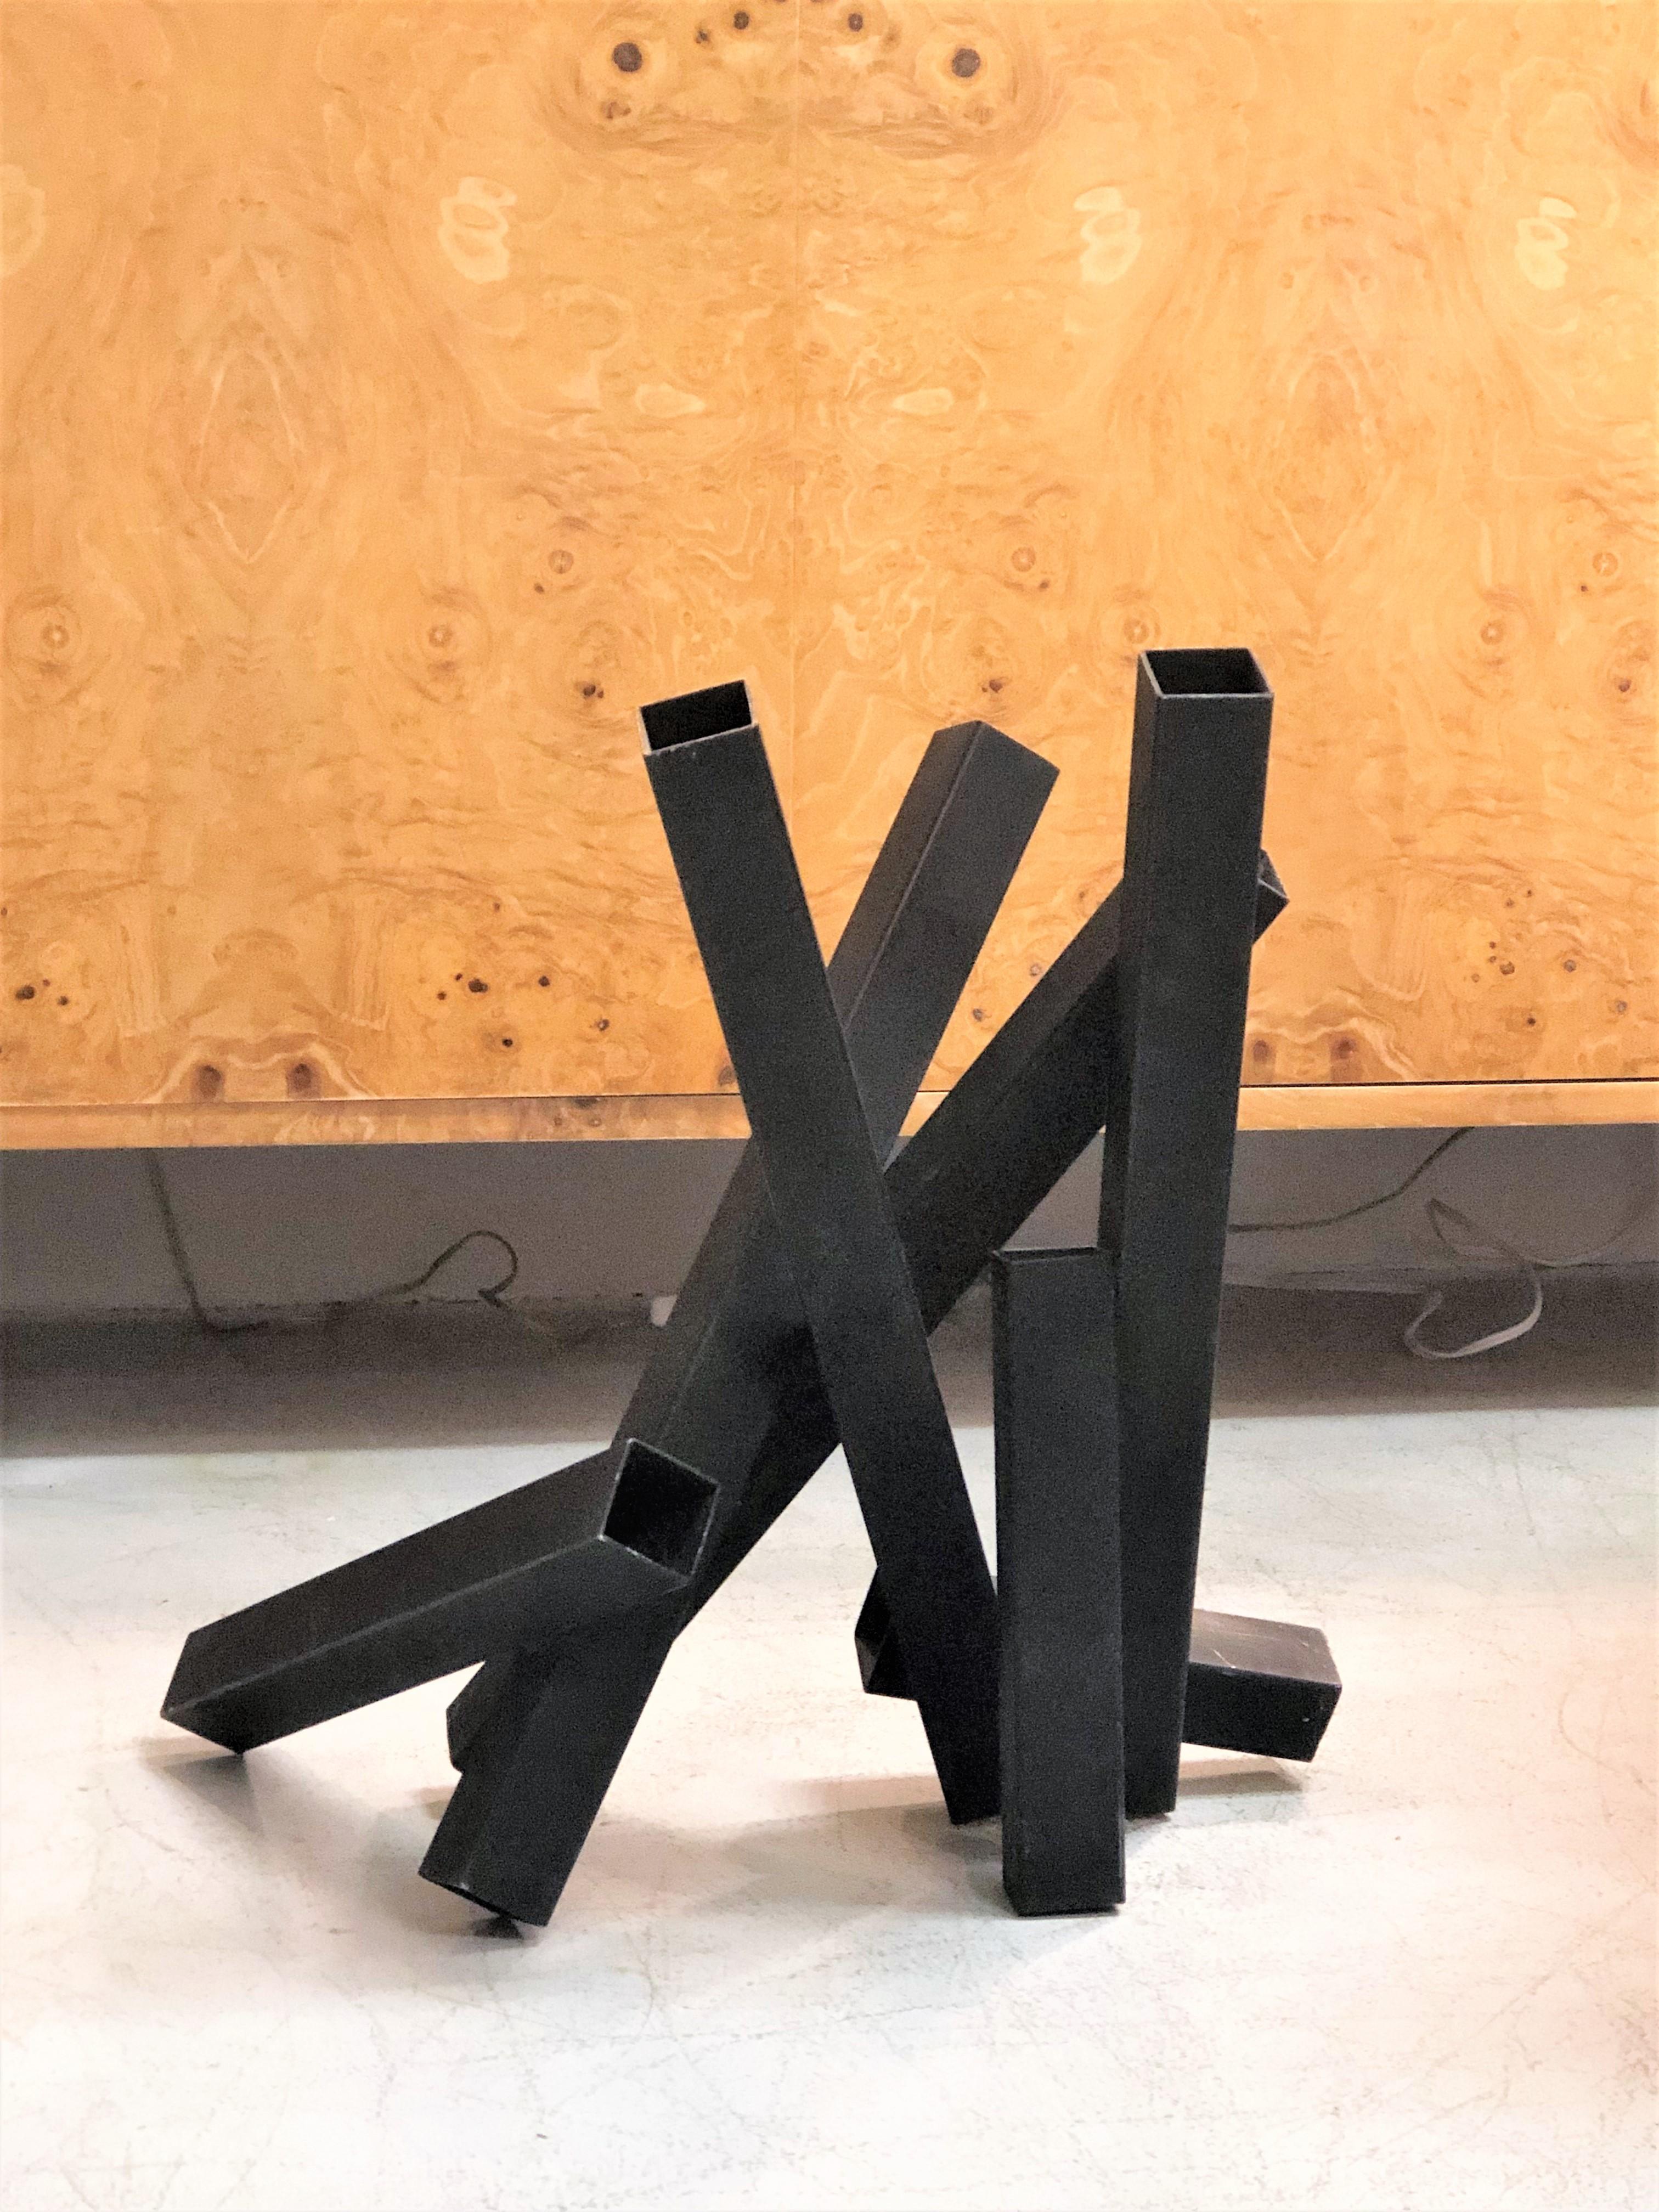 Late 20th Century Tony Rosenthal Abstract Steel and Black Enamel Sculpture